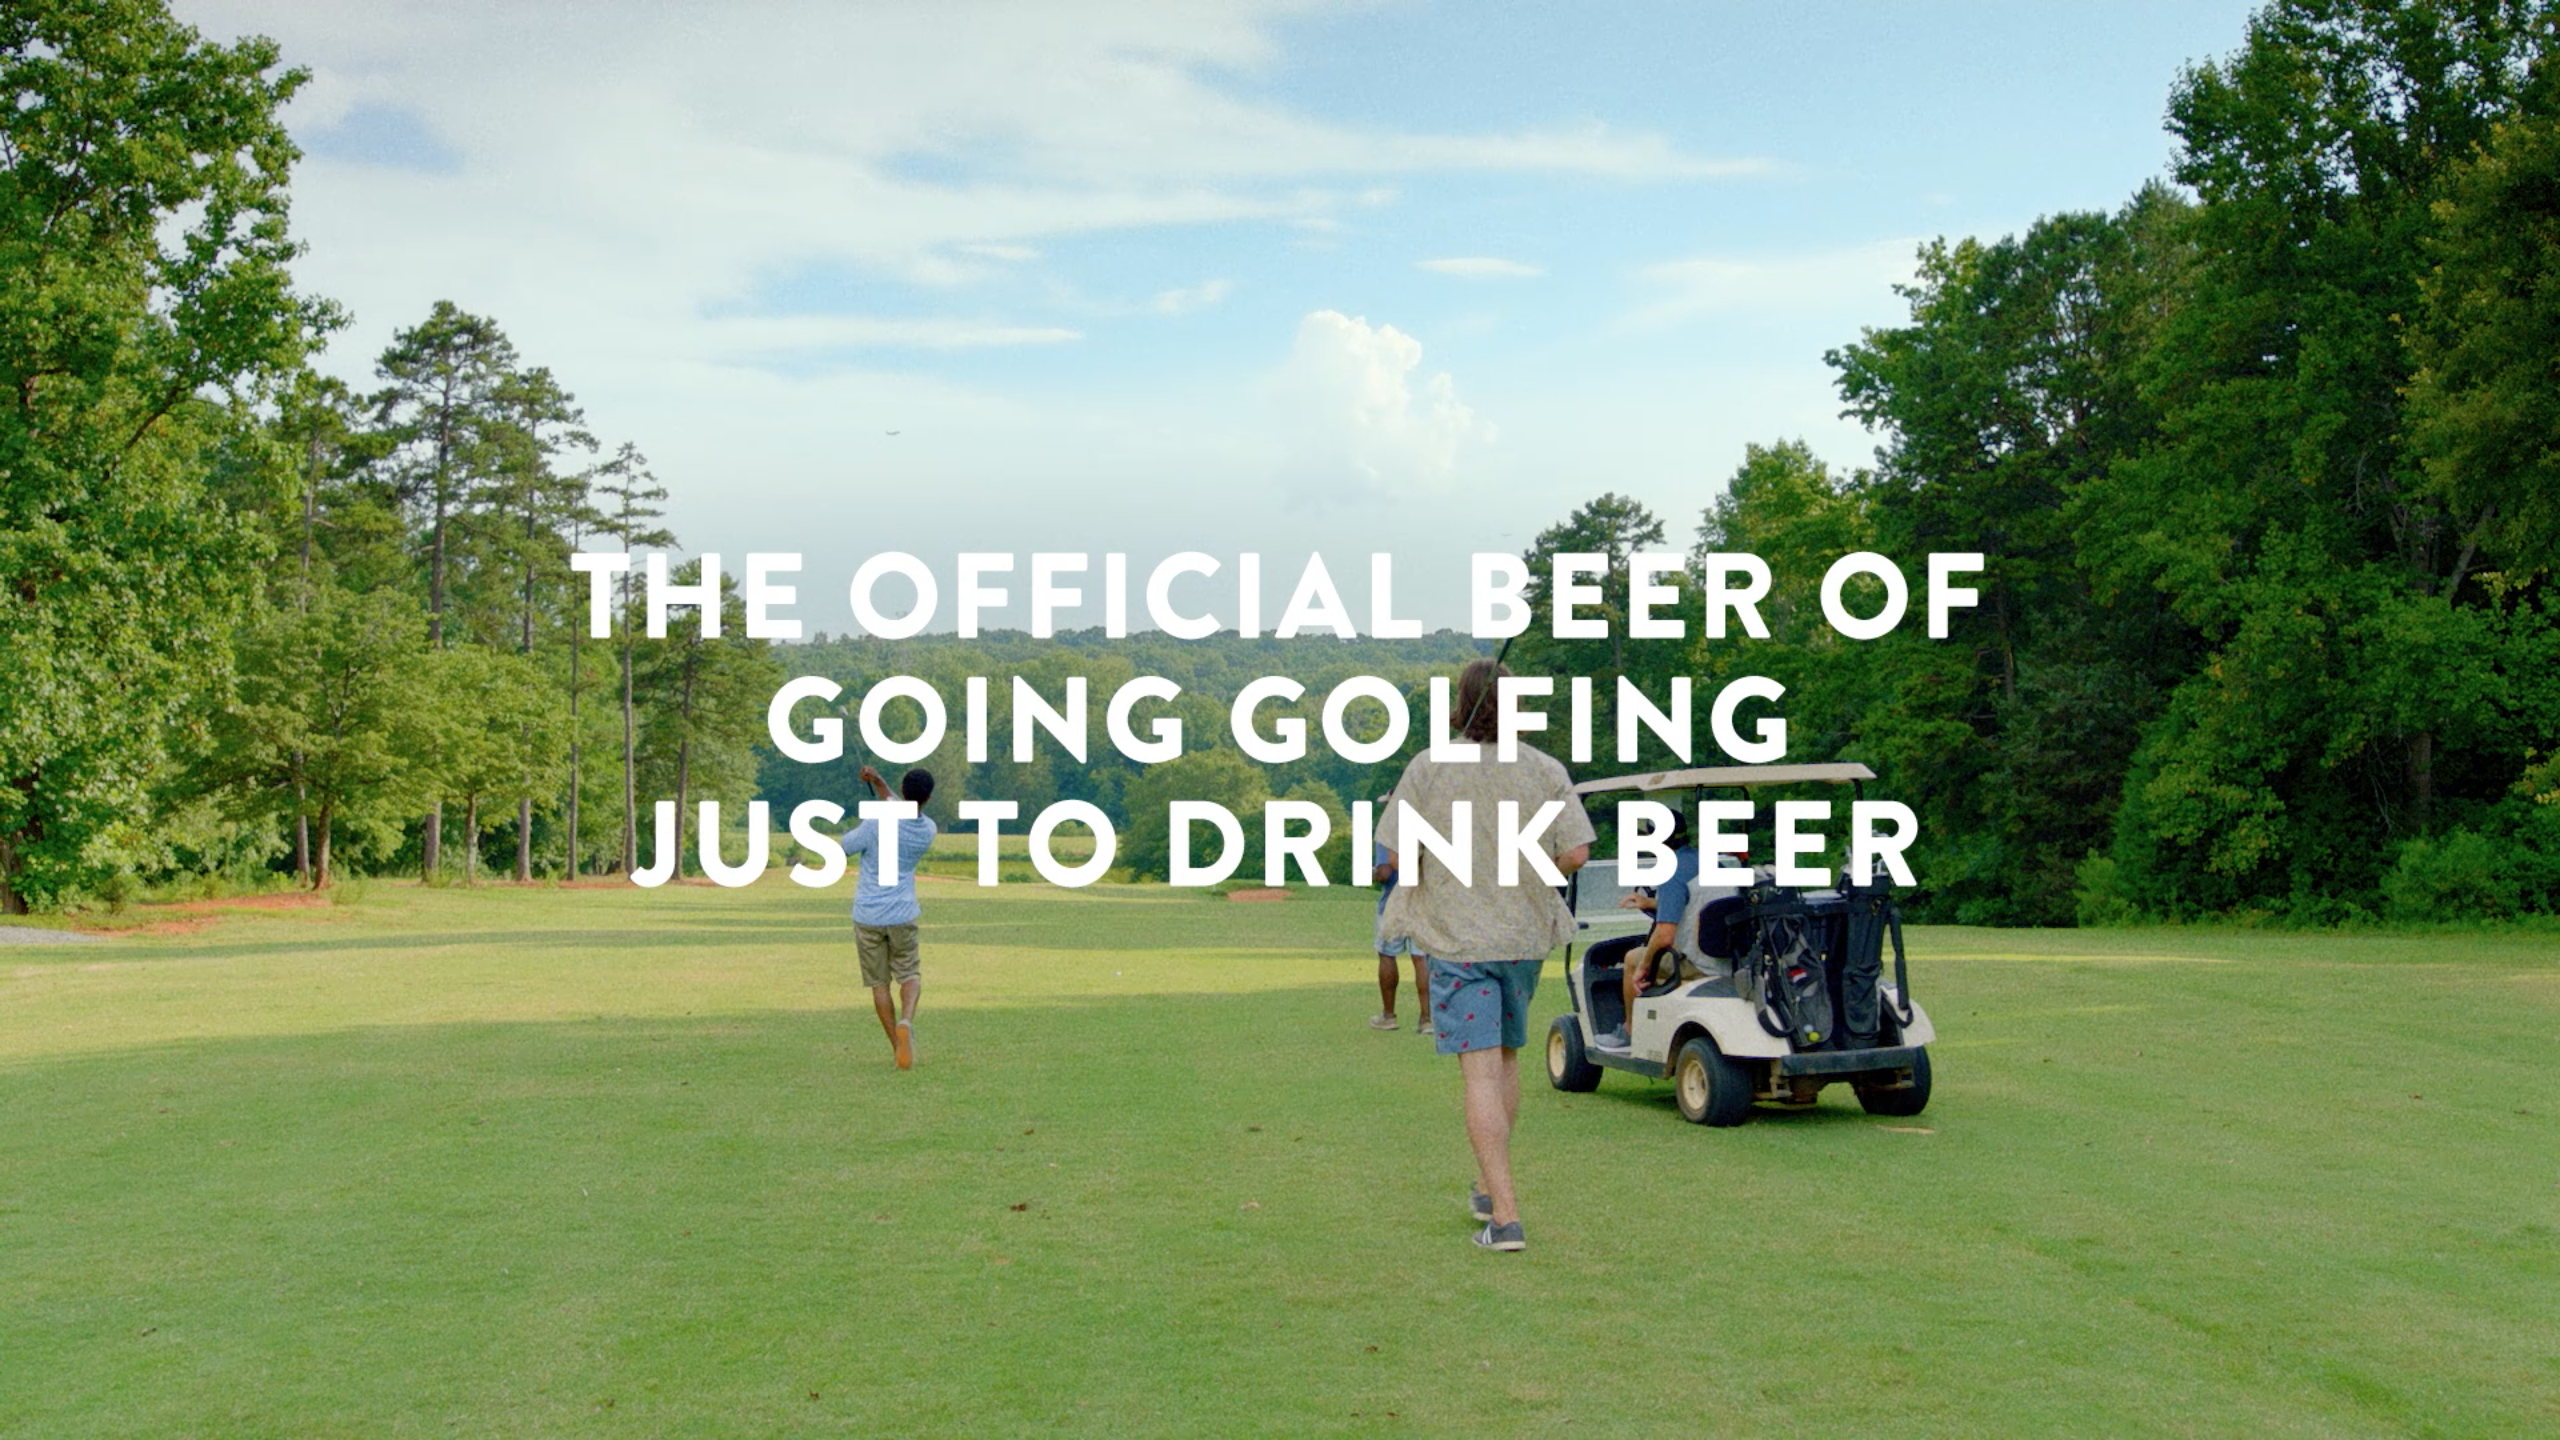 Official Beer of going golfing just to drink beer